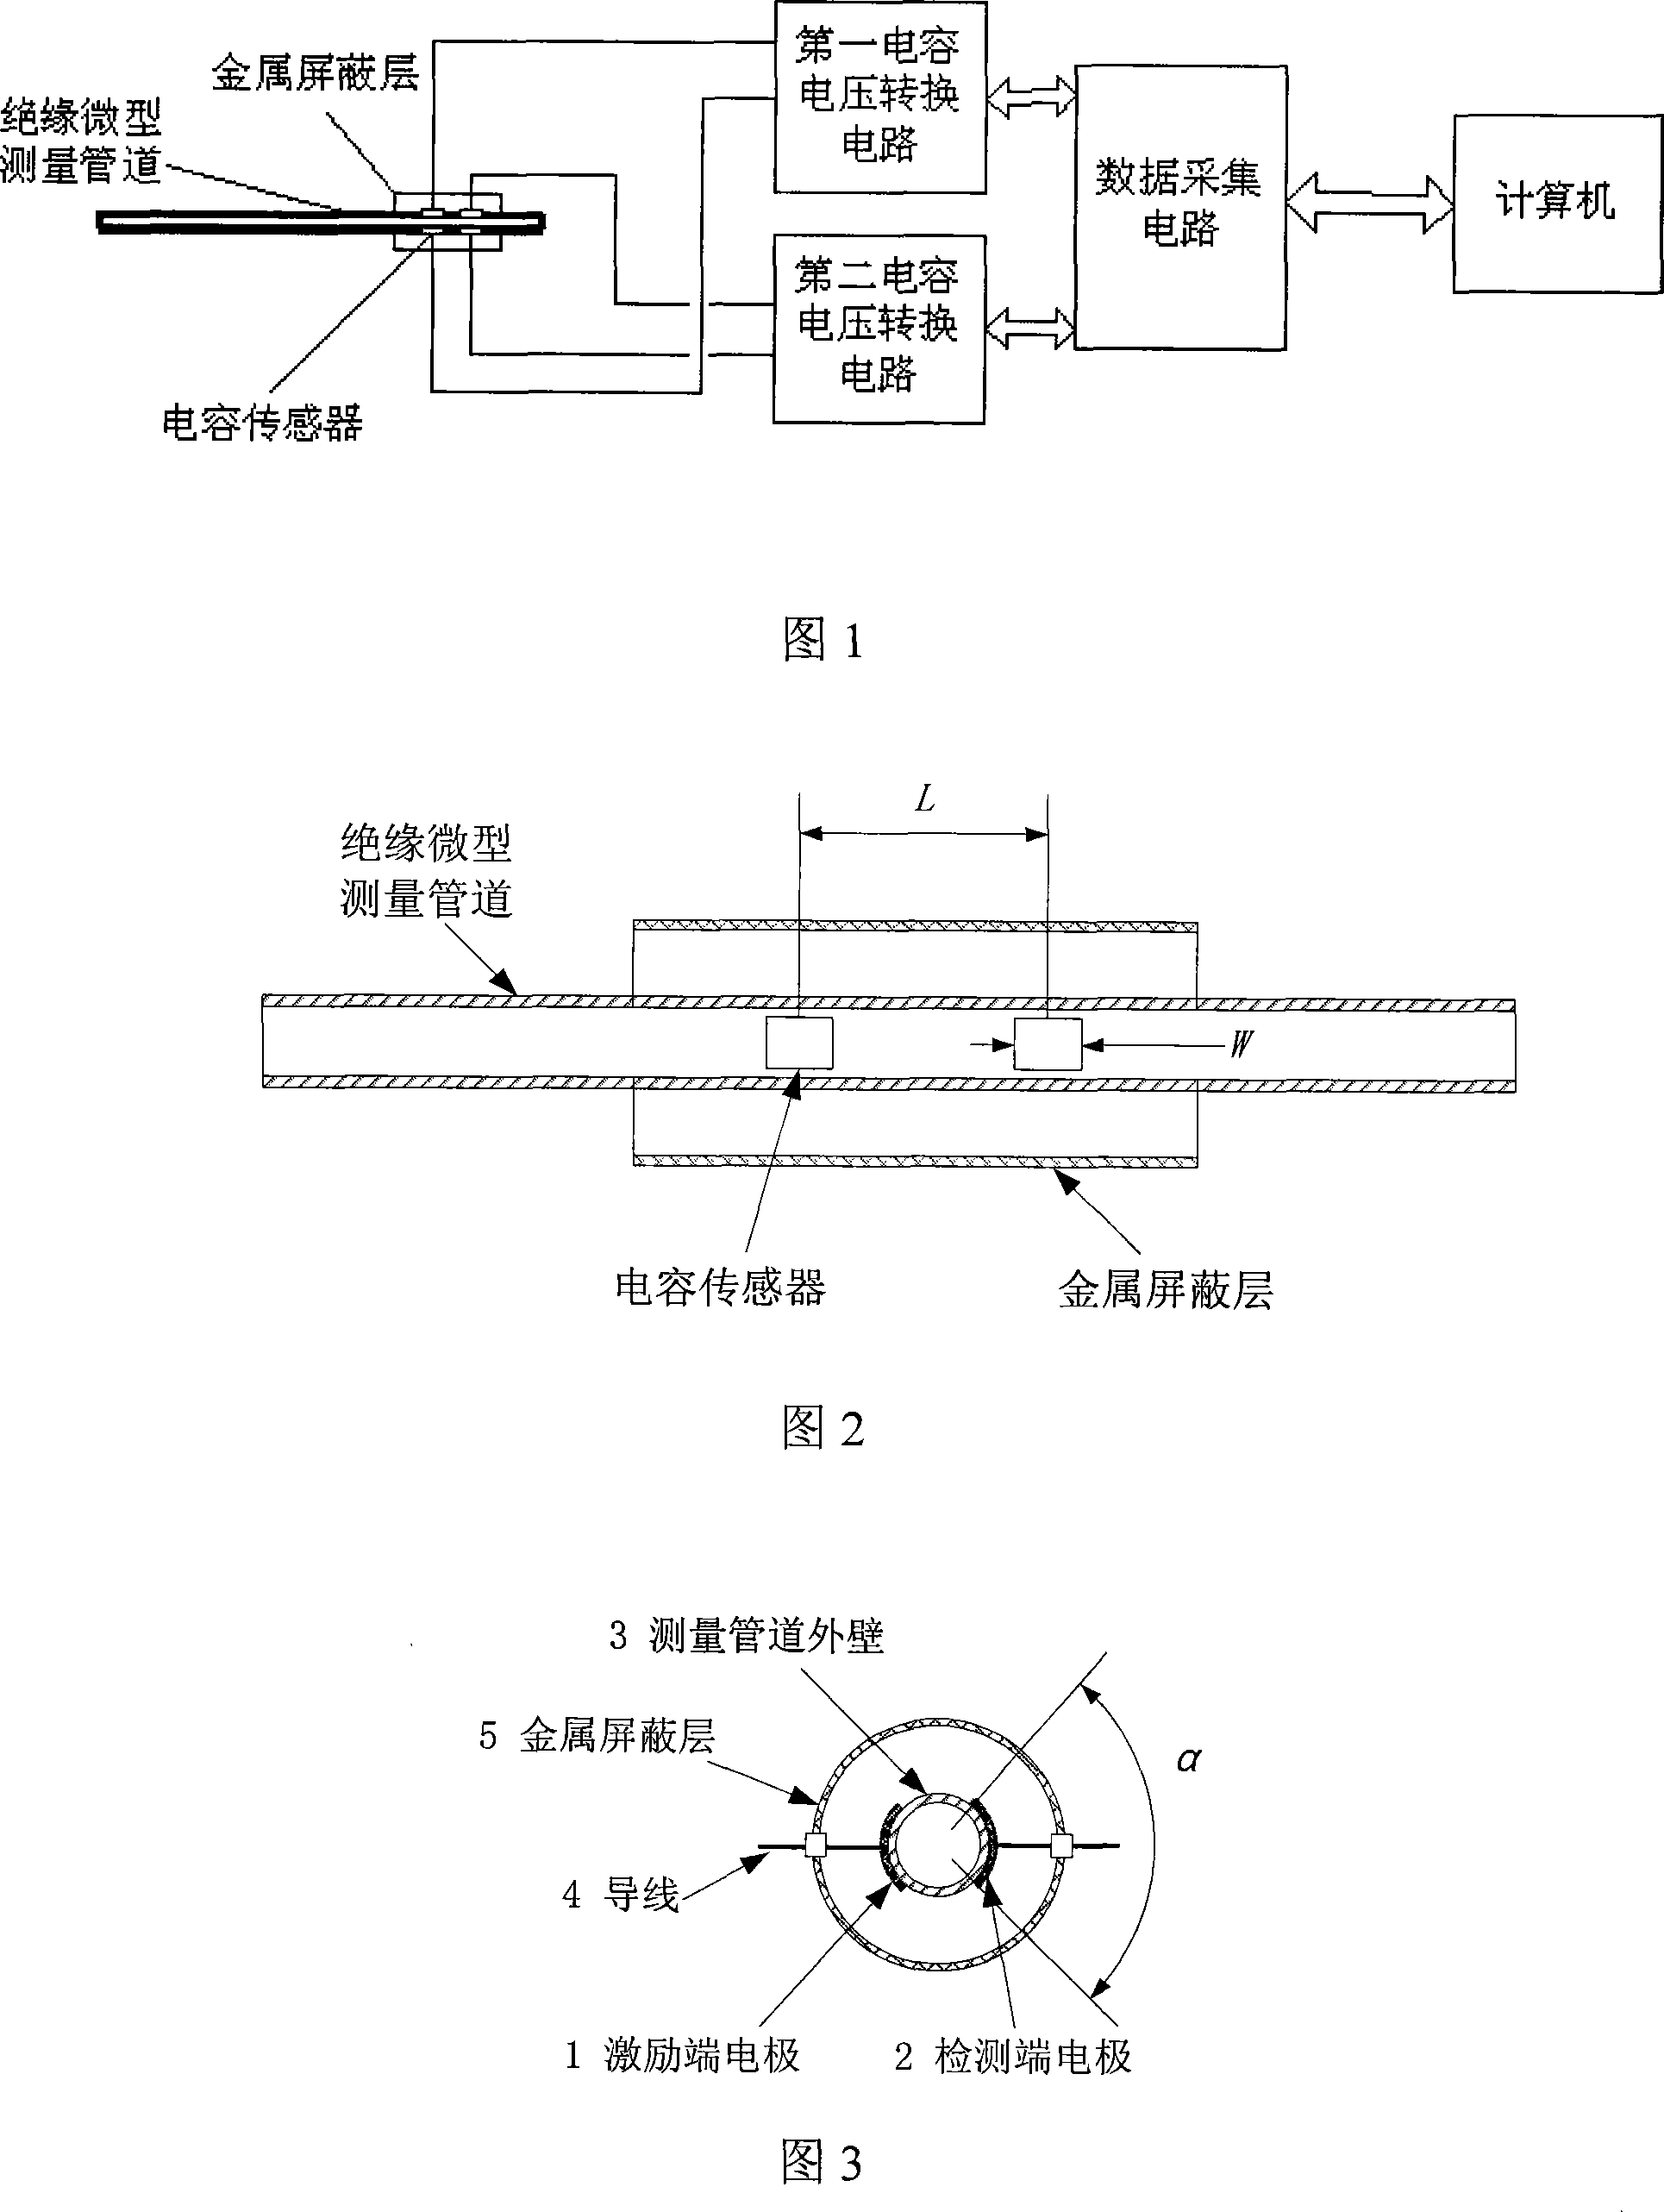 Apparatus and method for measuring microtubule gas-liquid diphasic flow rate